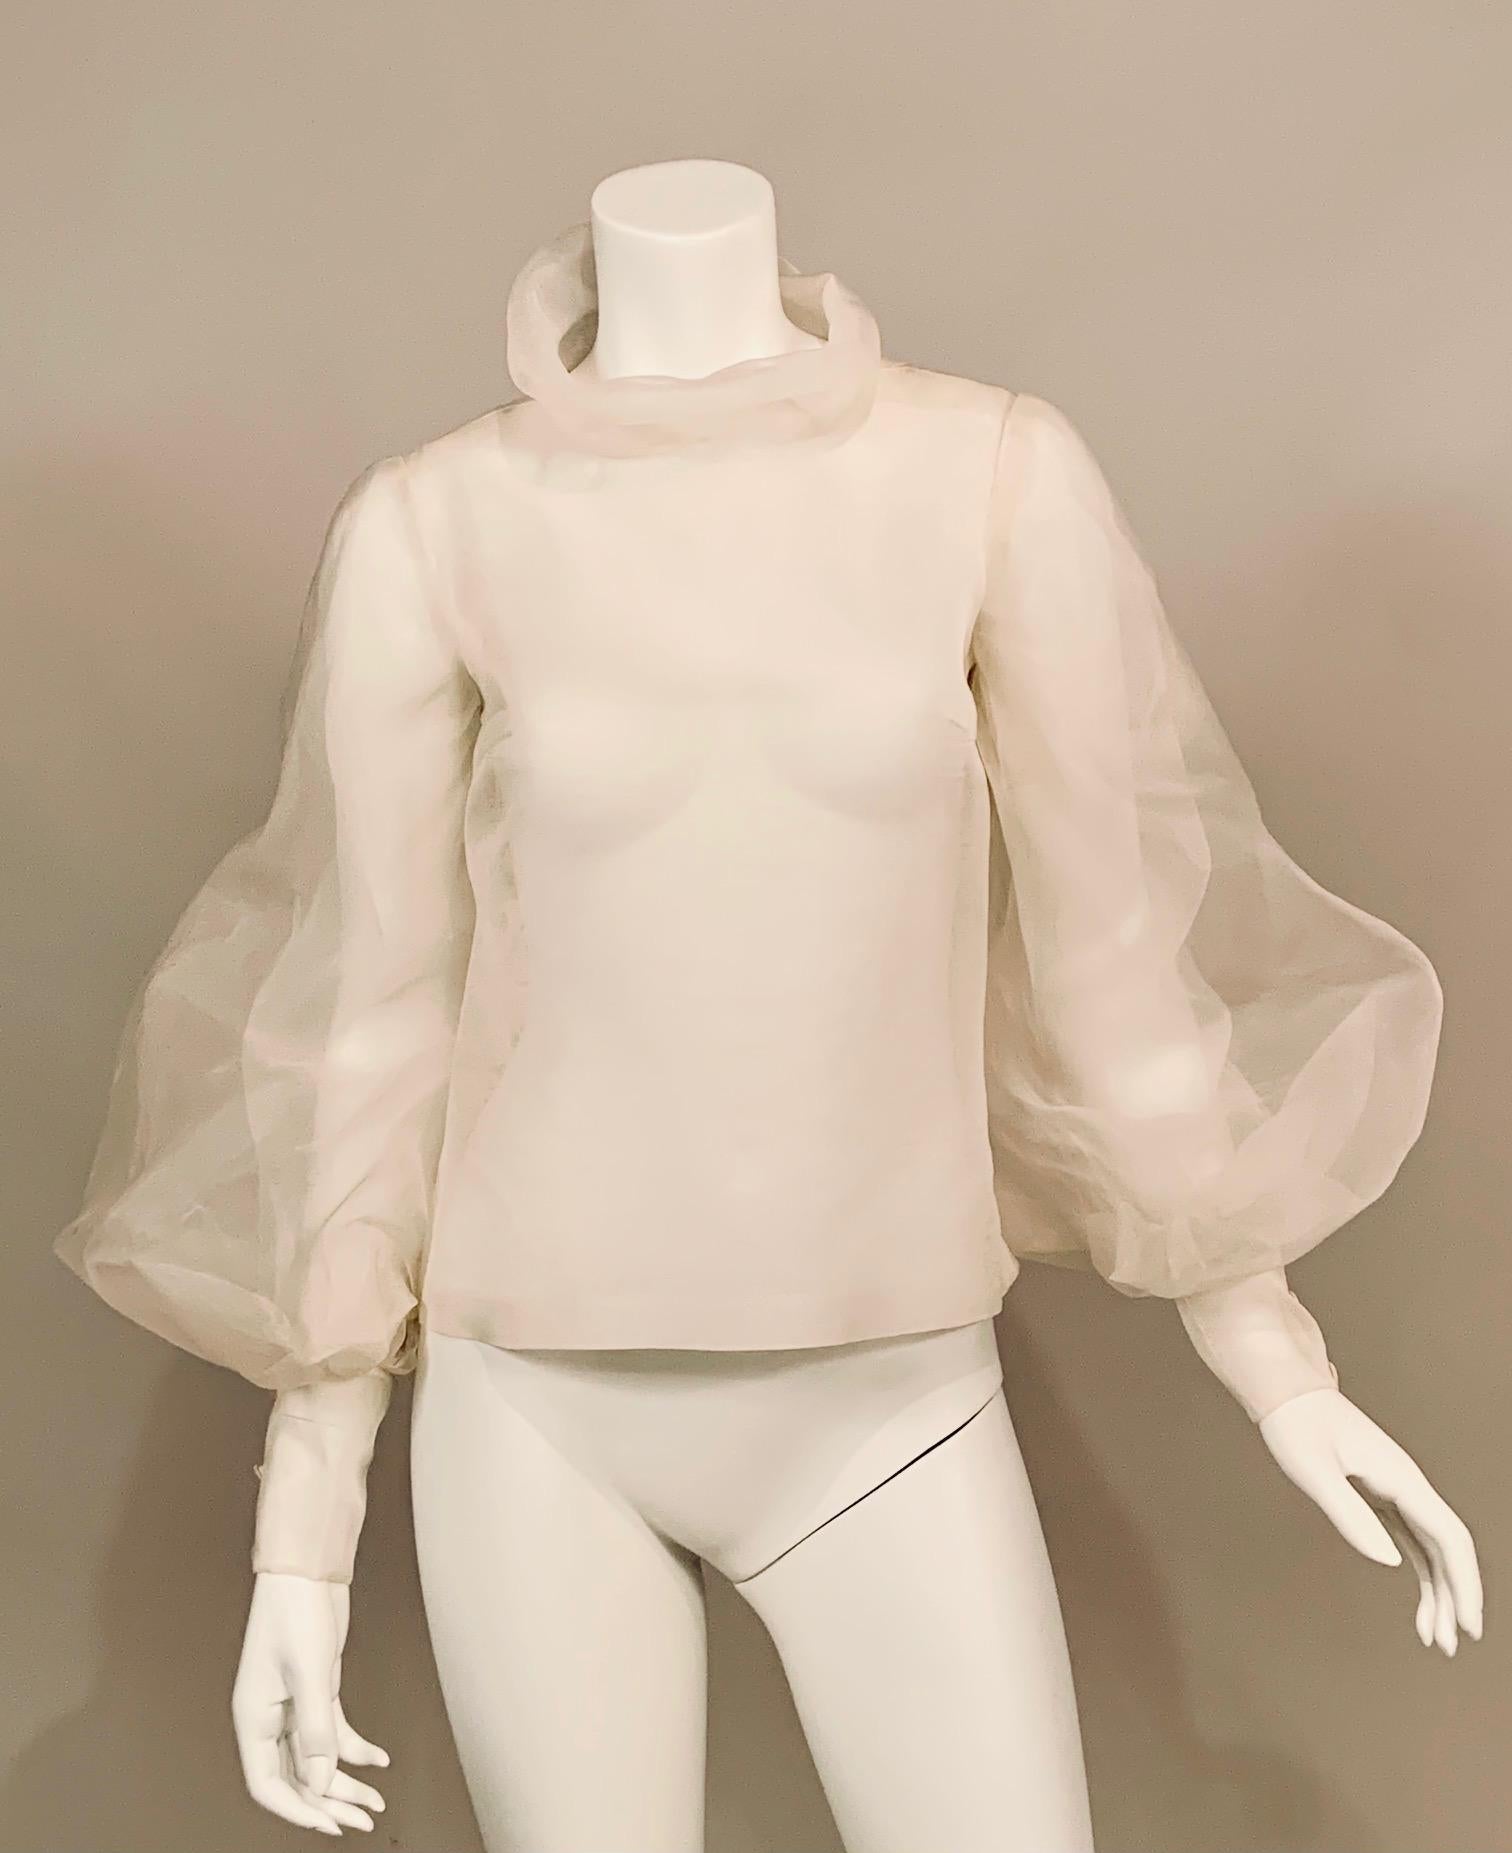 This Sybil Connolly sheer silk organza blouse is made from two layers of fabric in the Couture manner with generous amounts of hand sewing. The blouse has a stand up or rolled collar, long fitted sleeves with a very full, almost billowing second